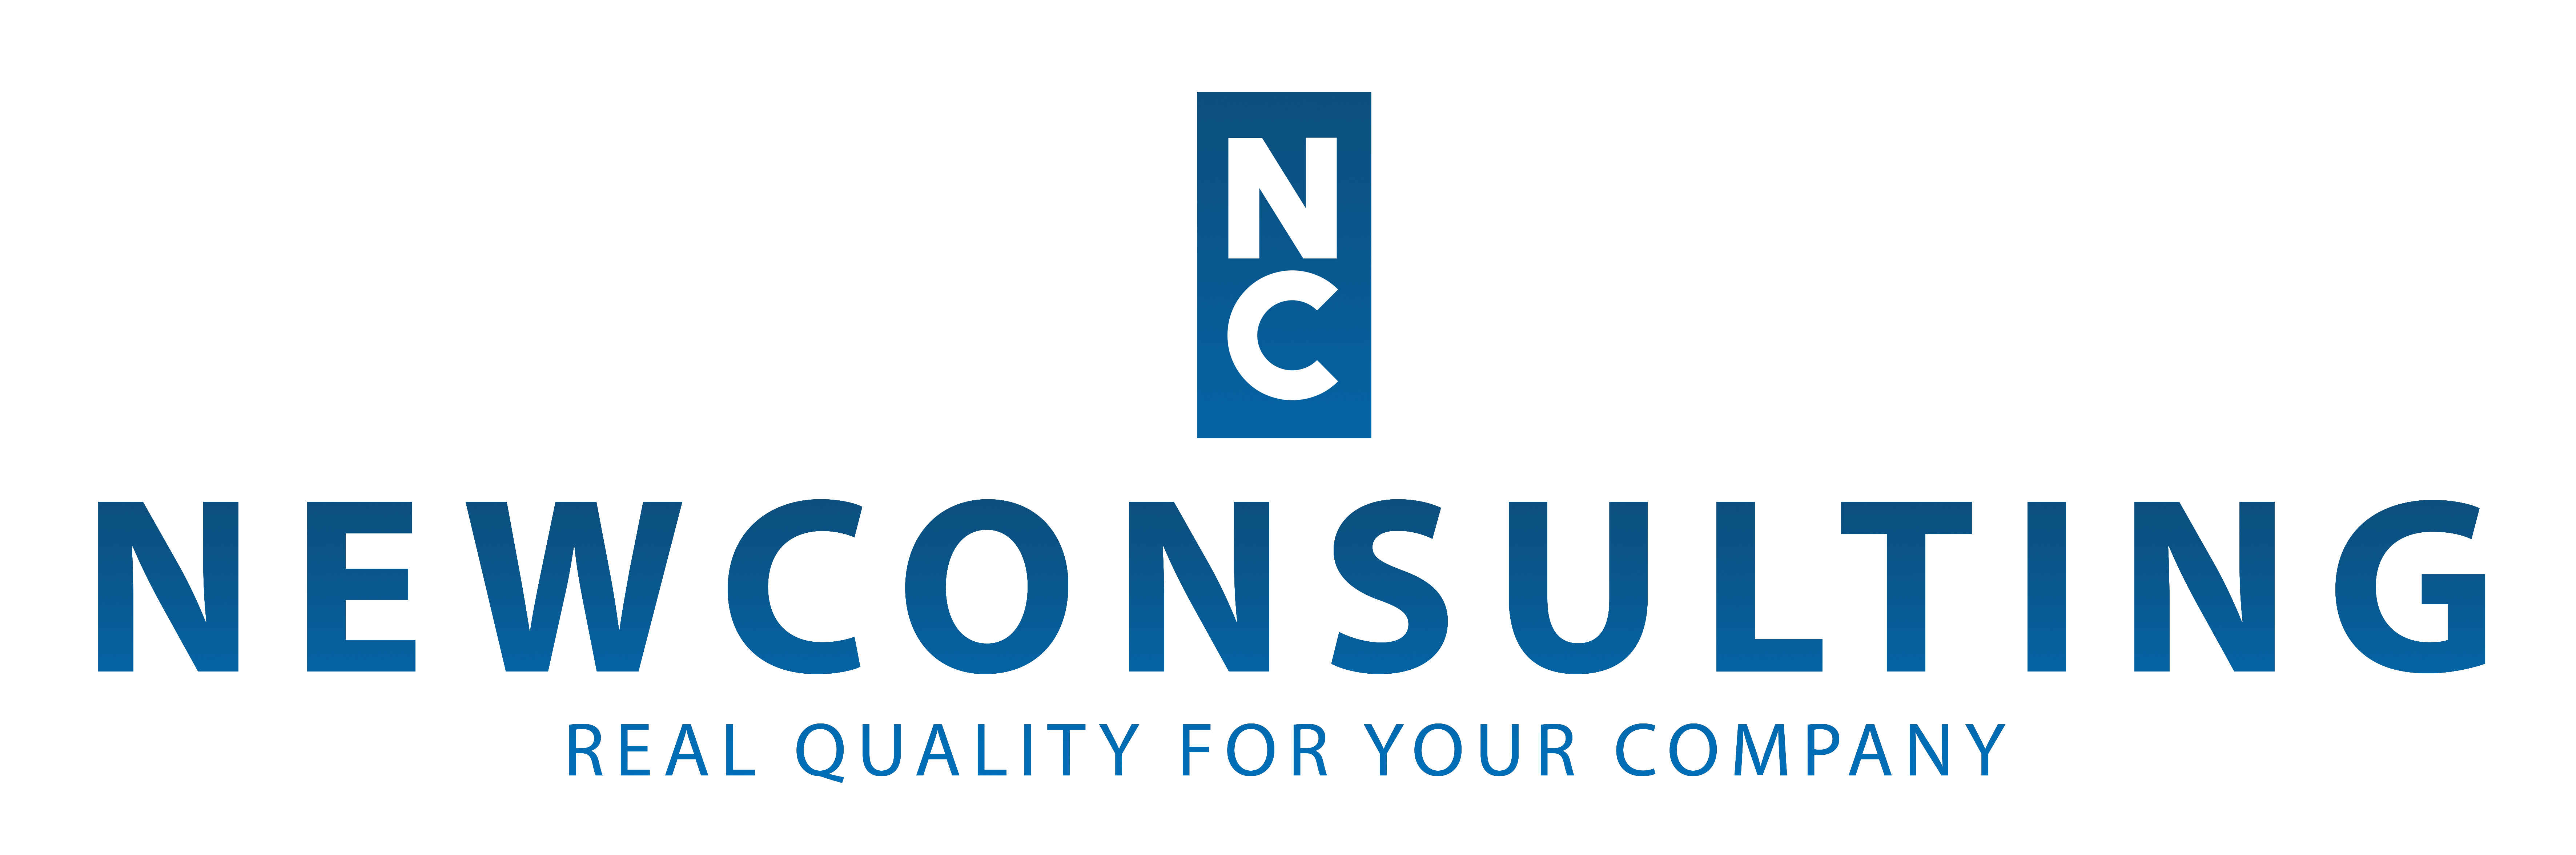 logo Newconsulting